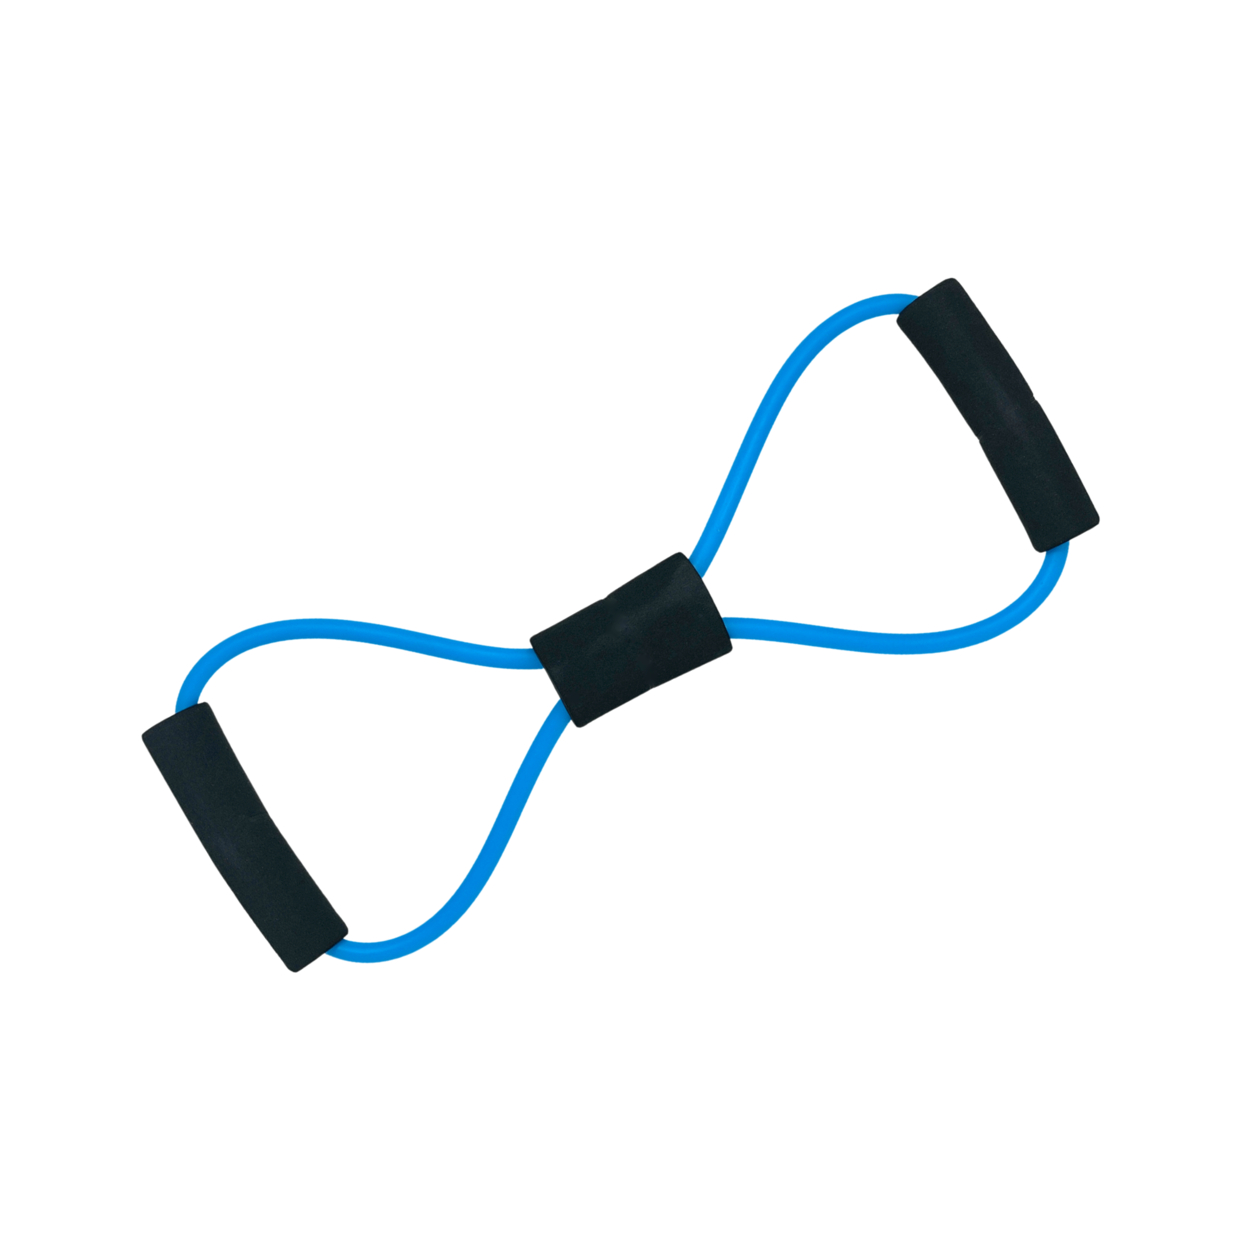 Figure-8 Resistance Band For Strength And Stability Exercises - Blue